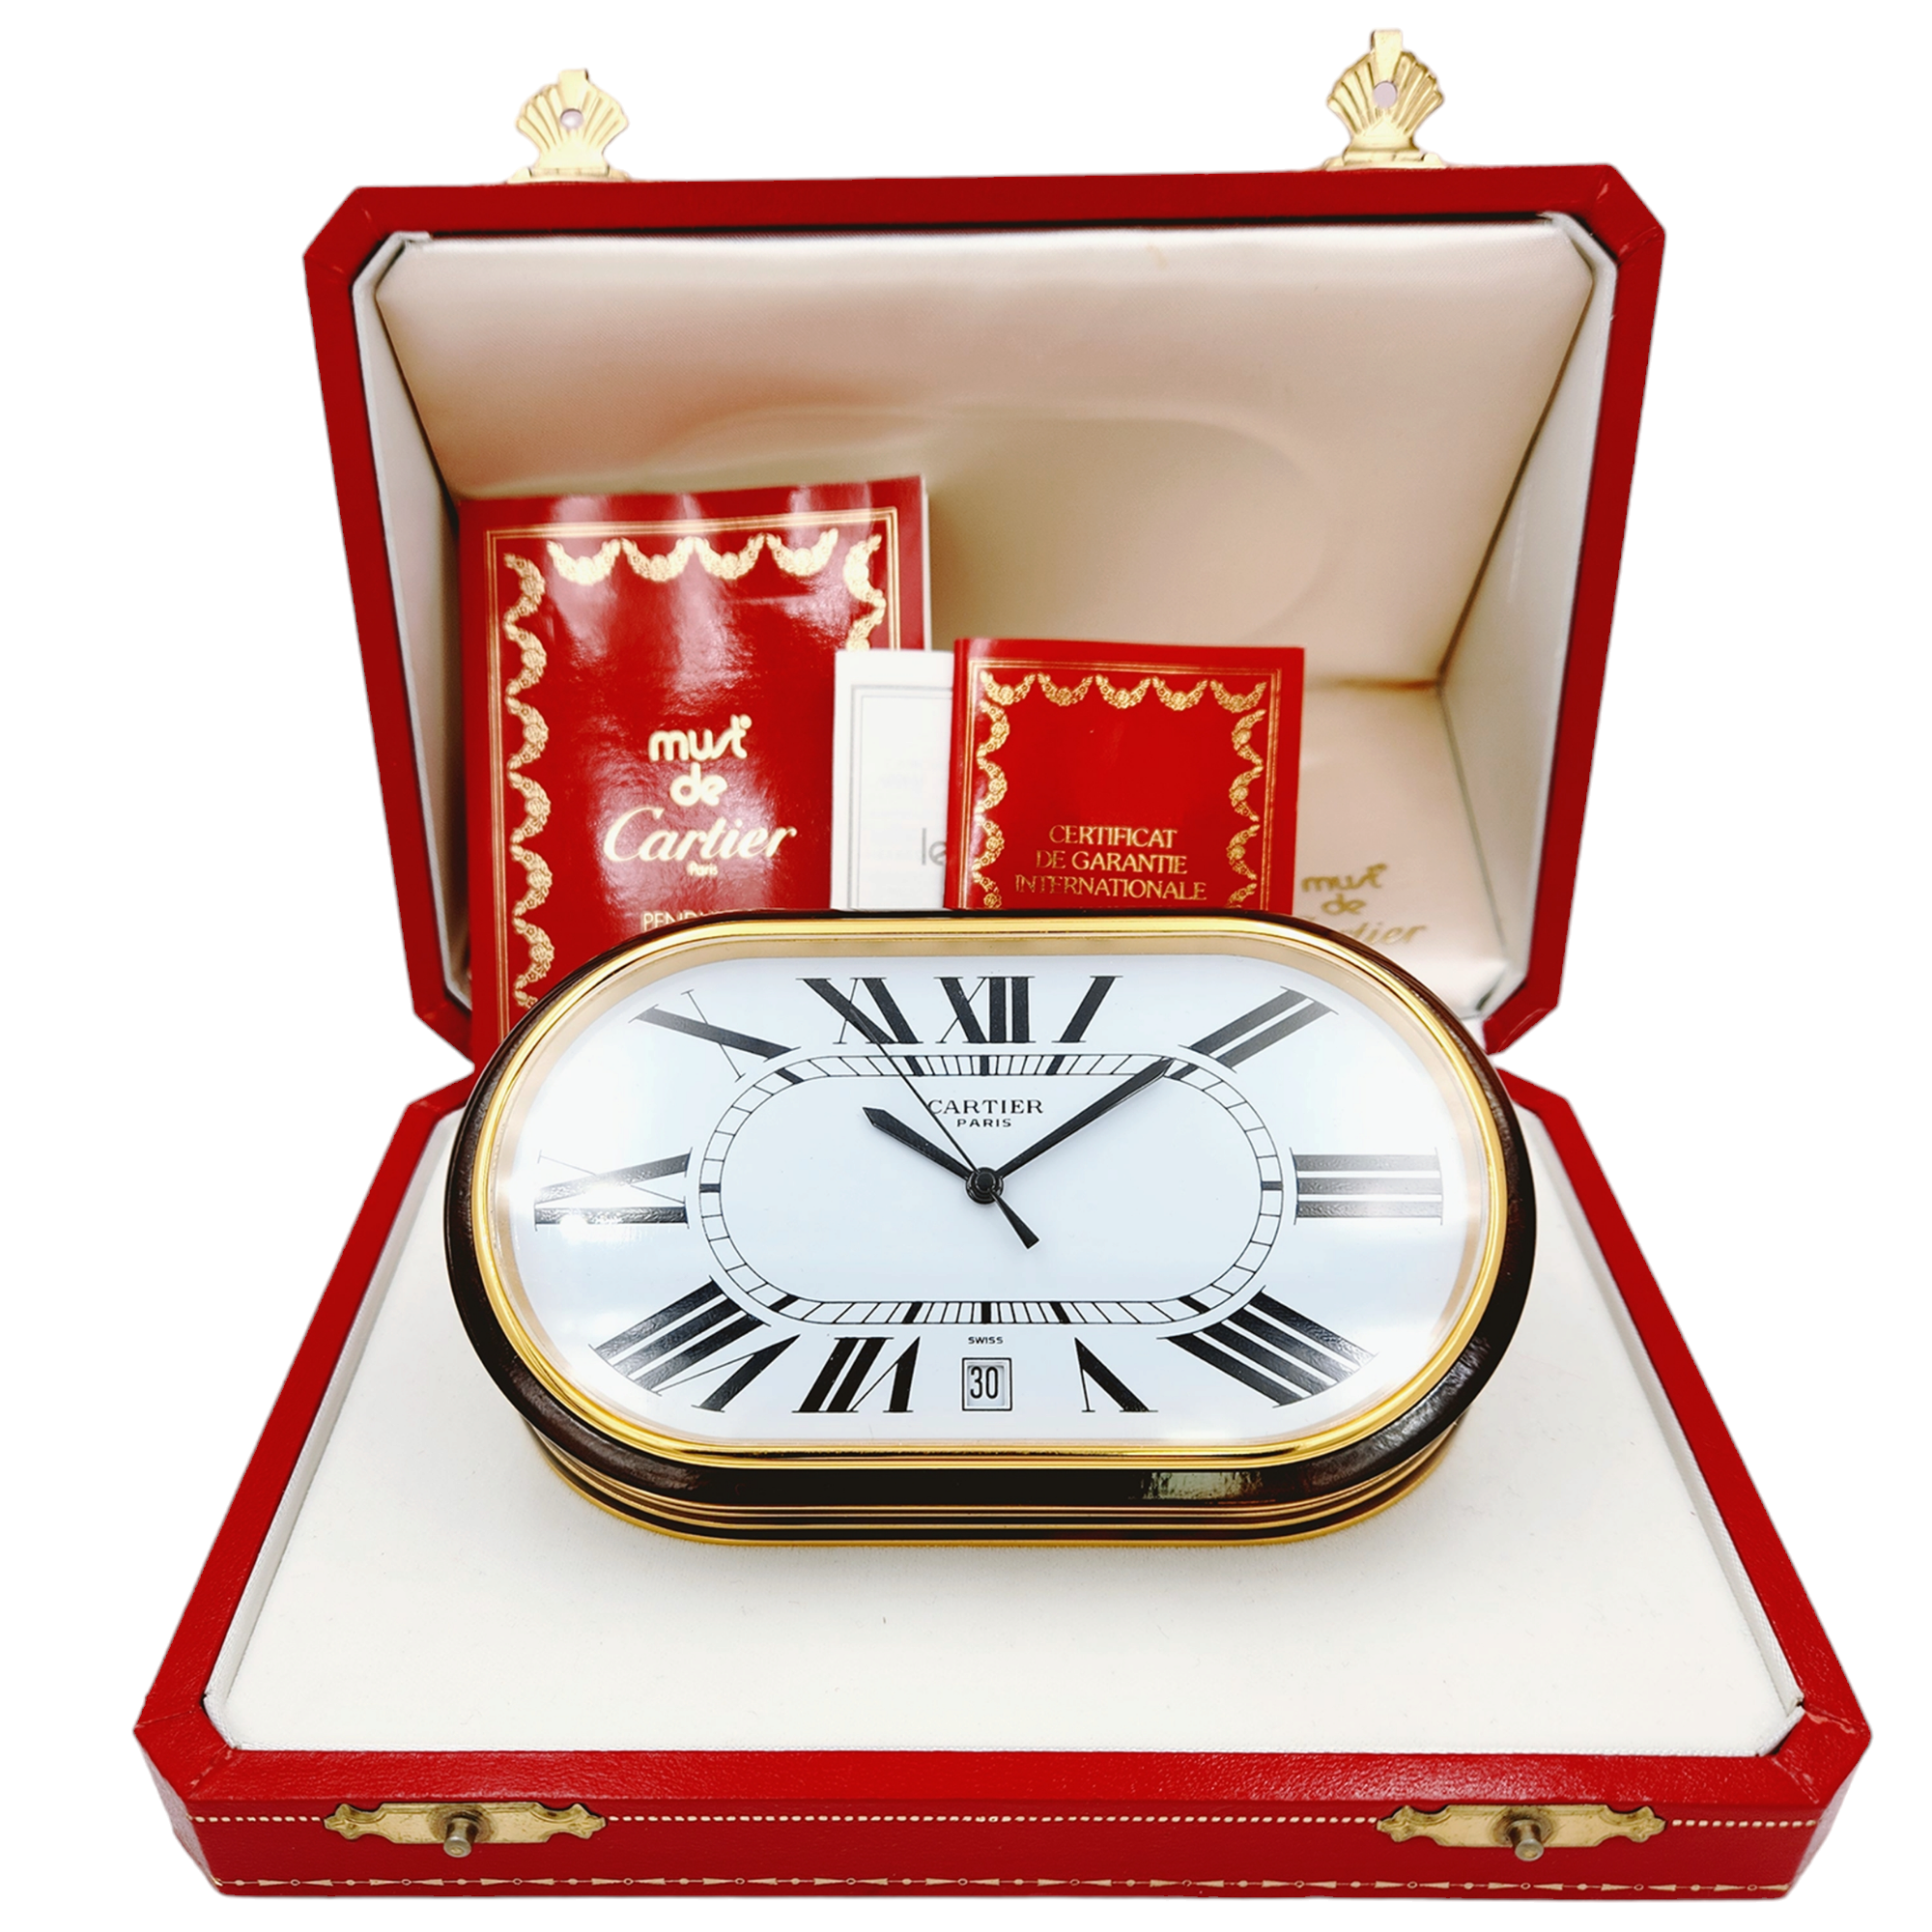 1988 Cartier Oval Accordion Vintage Heavy Desk Clock with Date and White Roman Numeral Dial. (Pre-Owned)